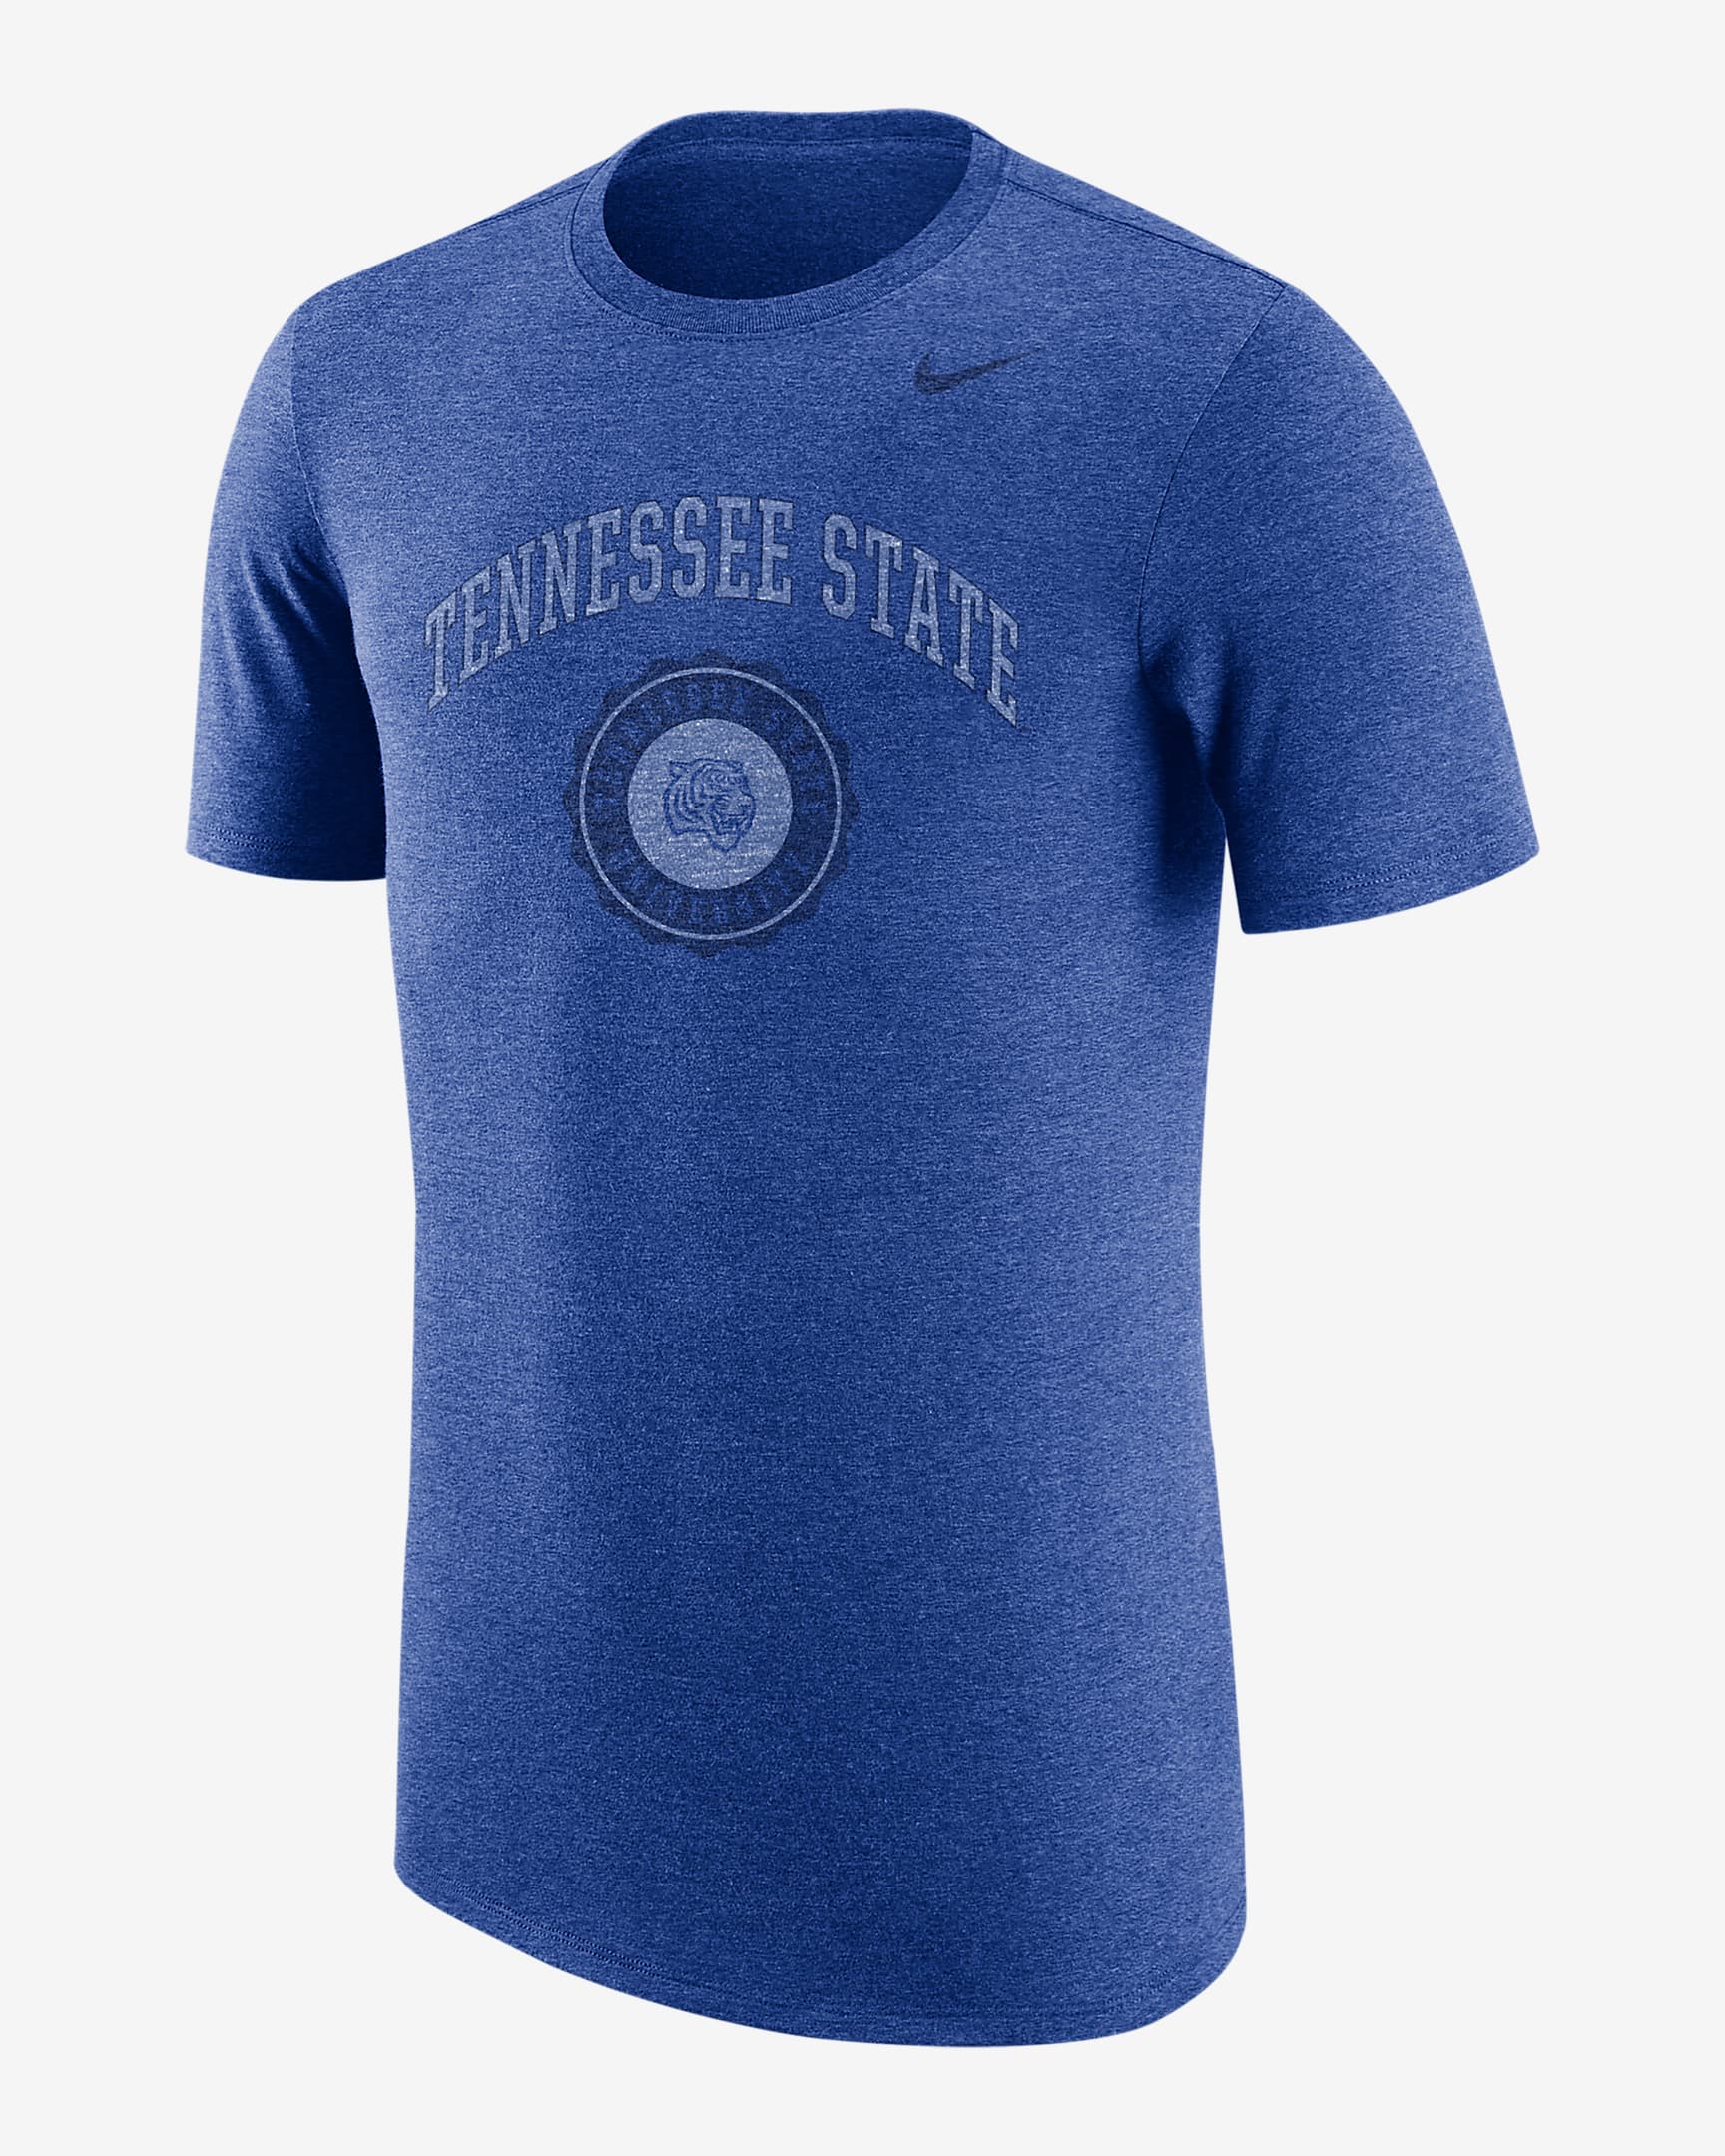 Nike College (Tennessee State) Men's T-Shirt. Nike.com